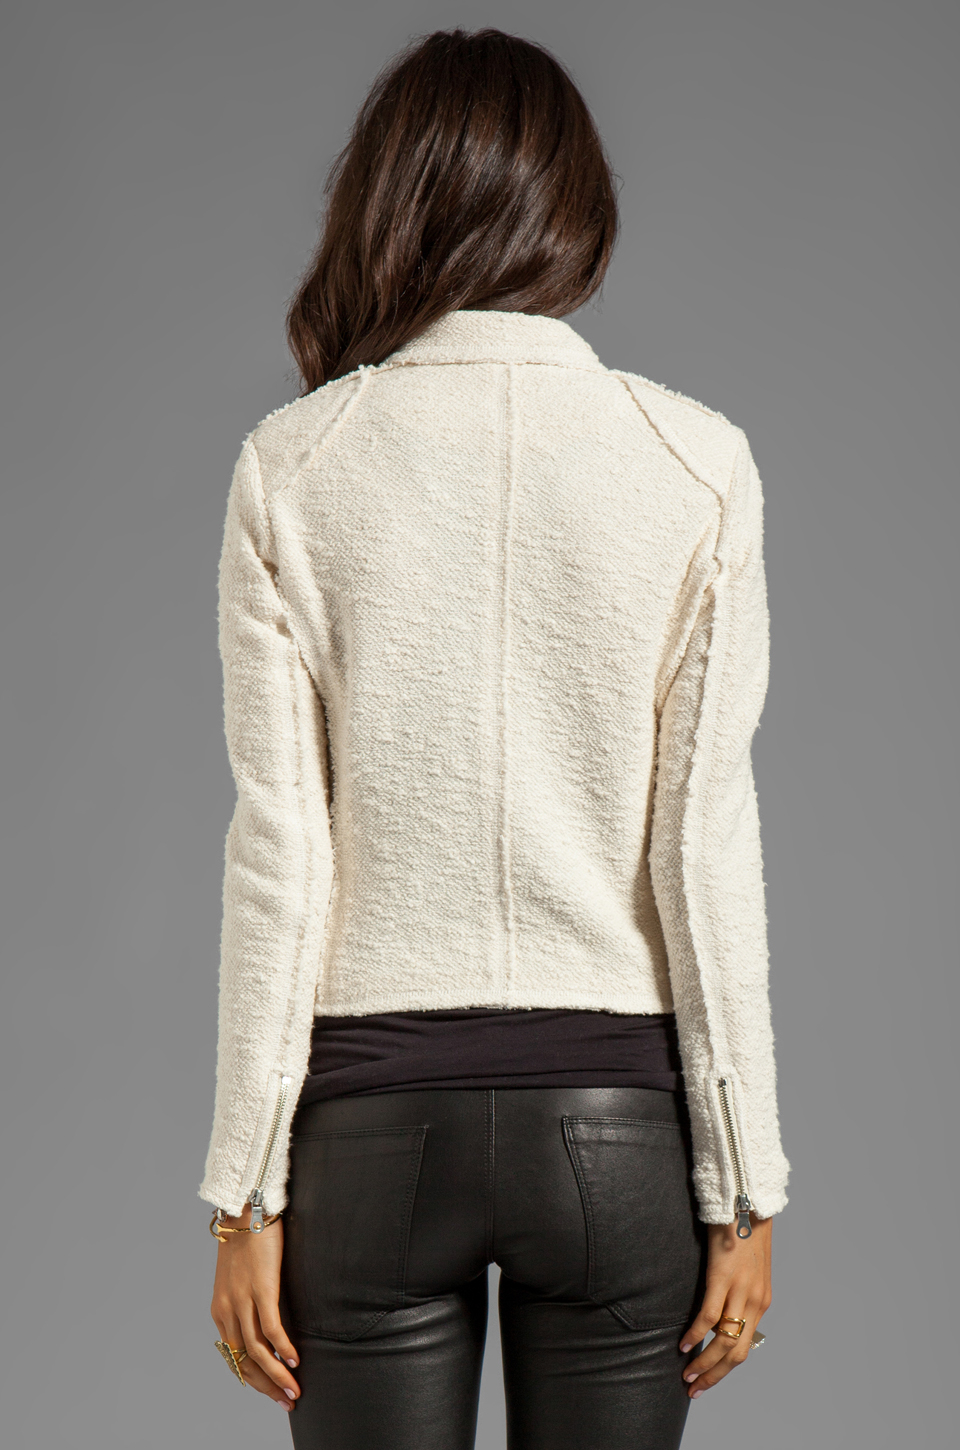 Lyst Rebecca Taylor Boucle Moto Jacket in Cream in White